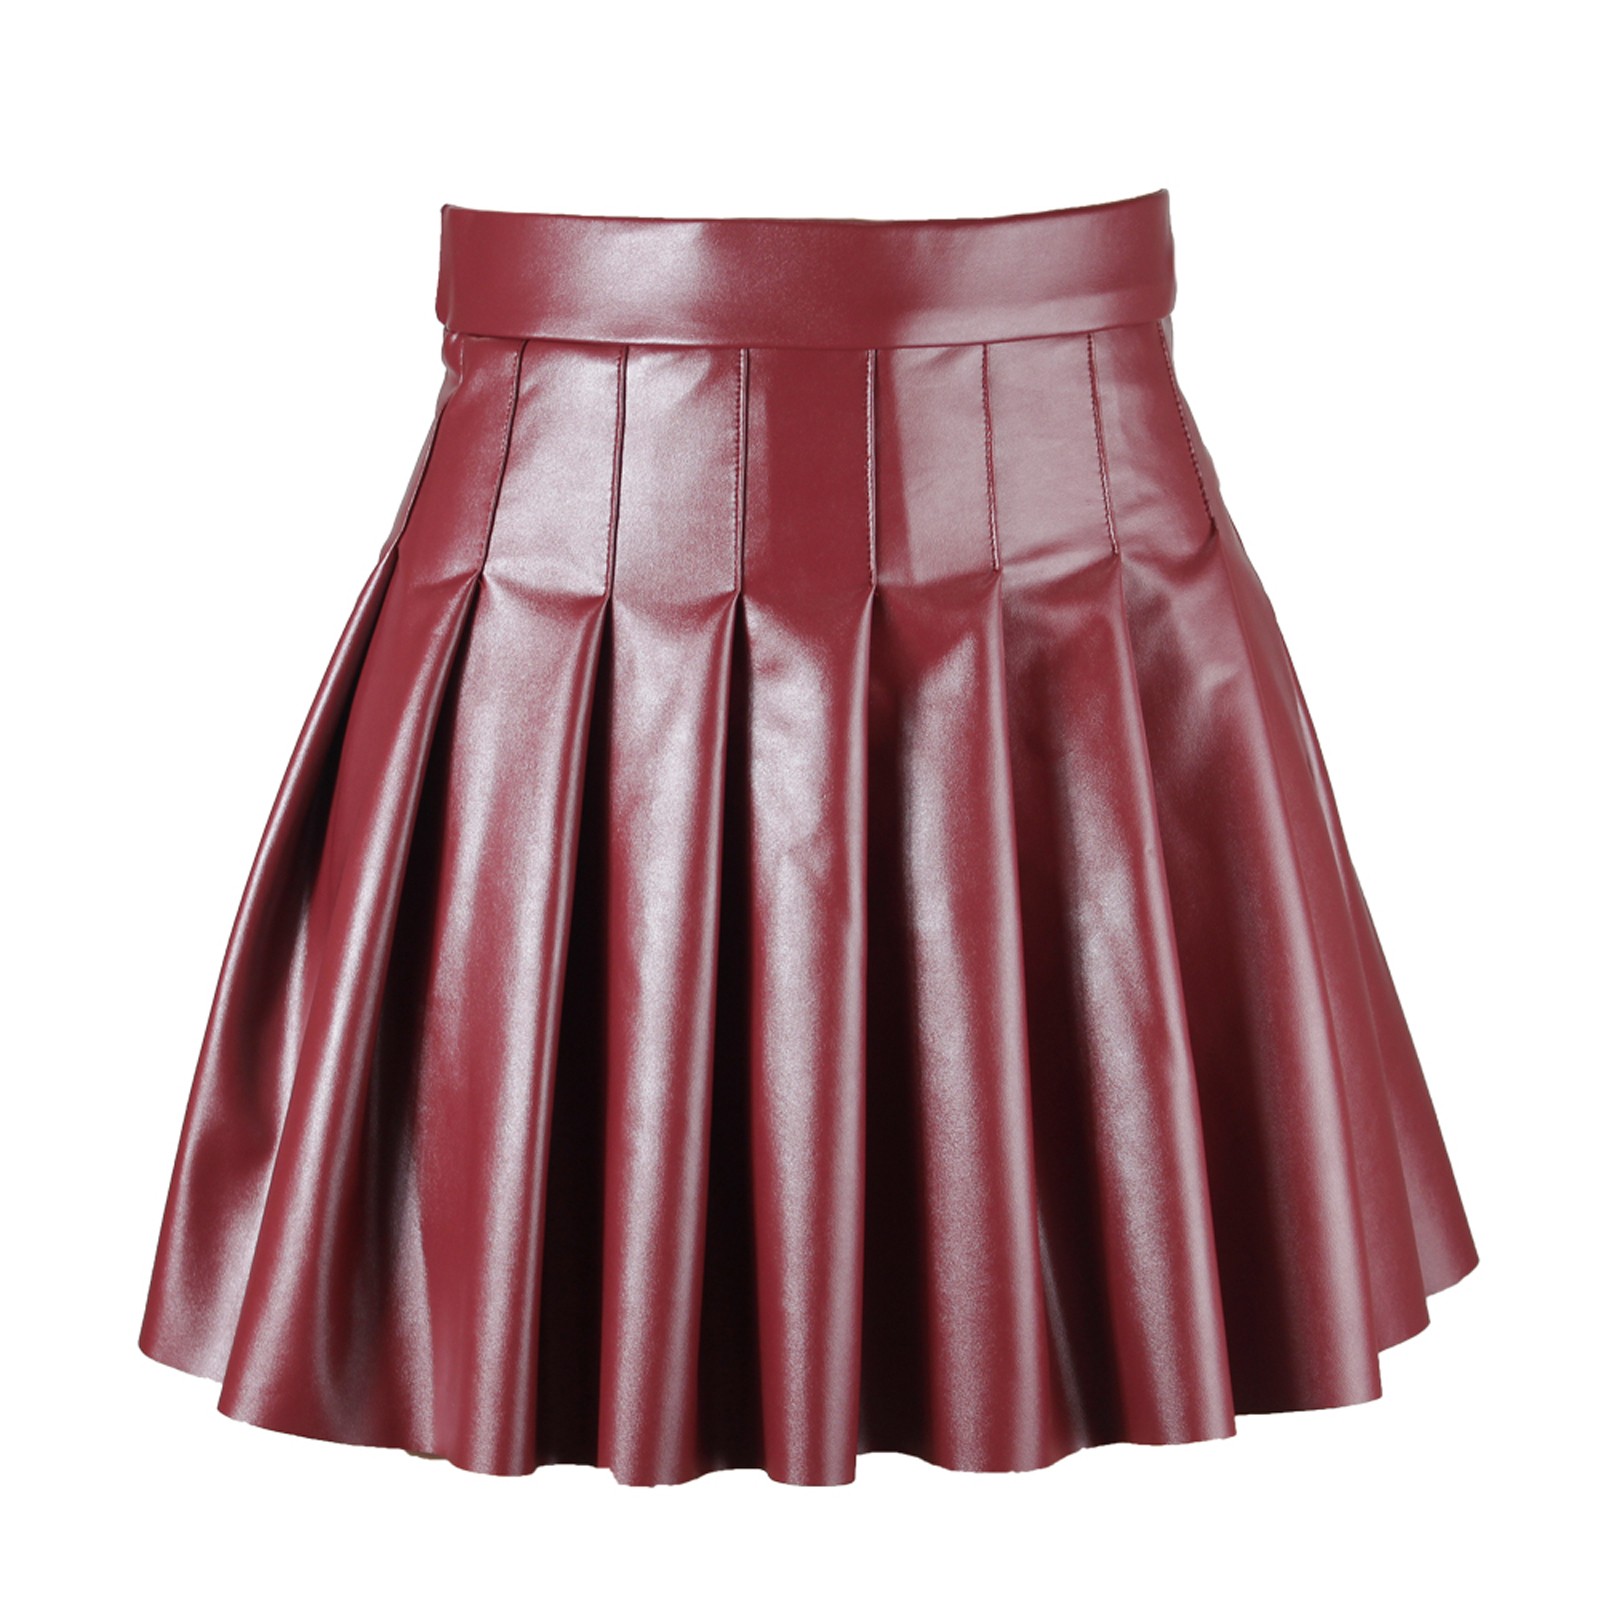 Casual Women's skirts midi red clearance,Leather skirt for women scoop ...